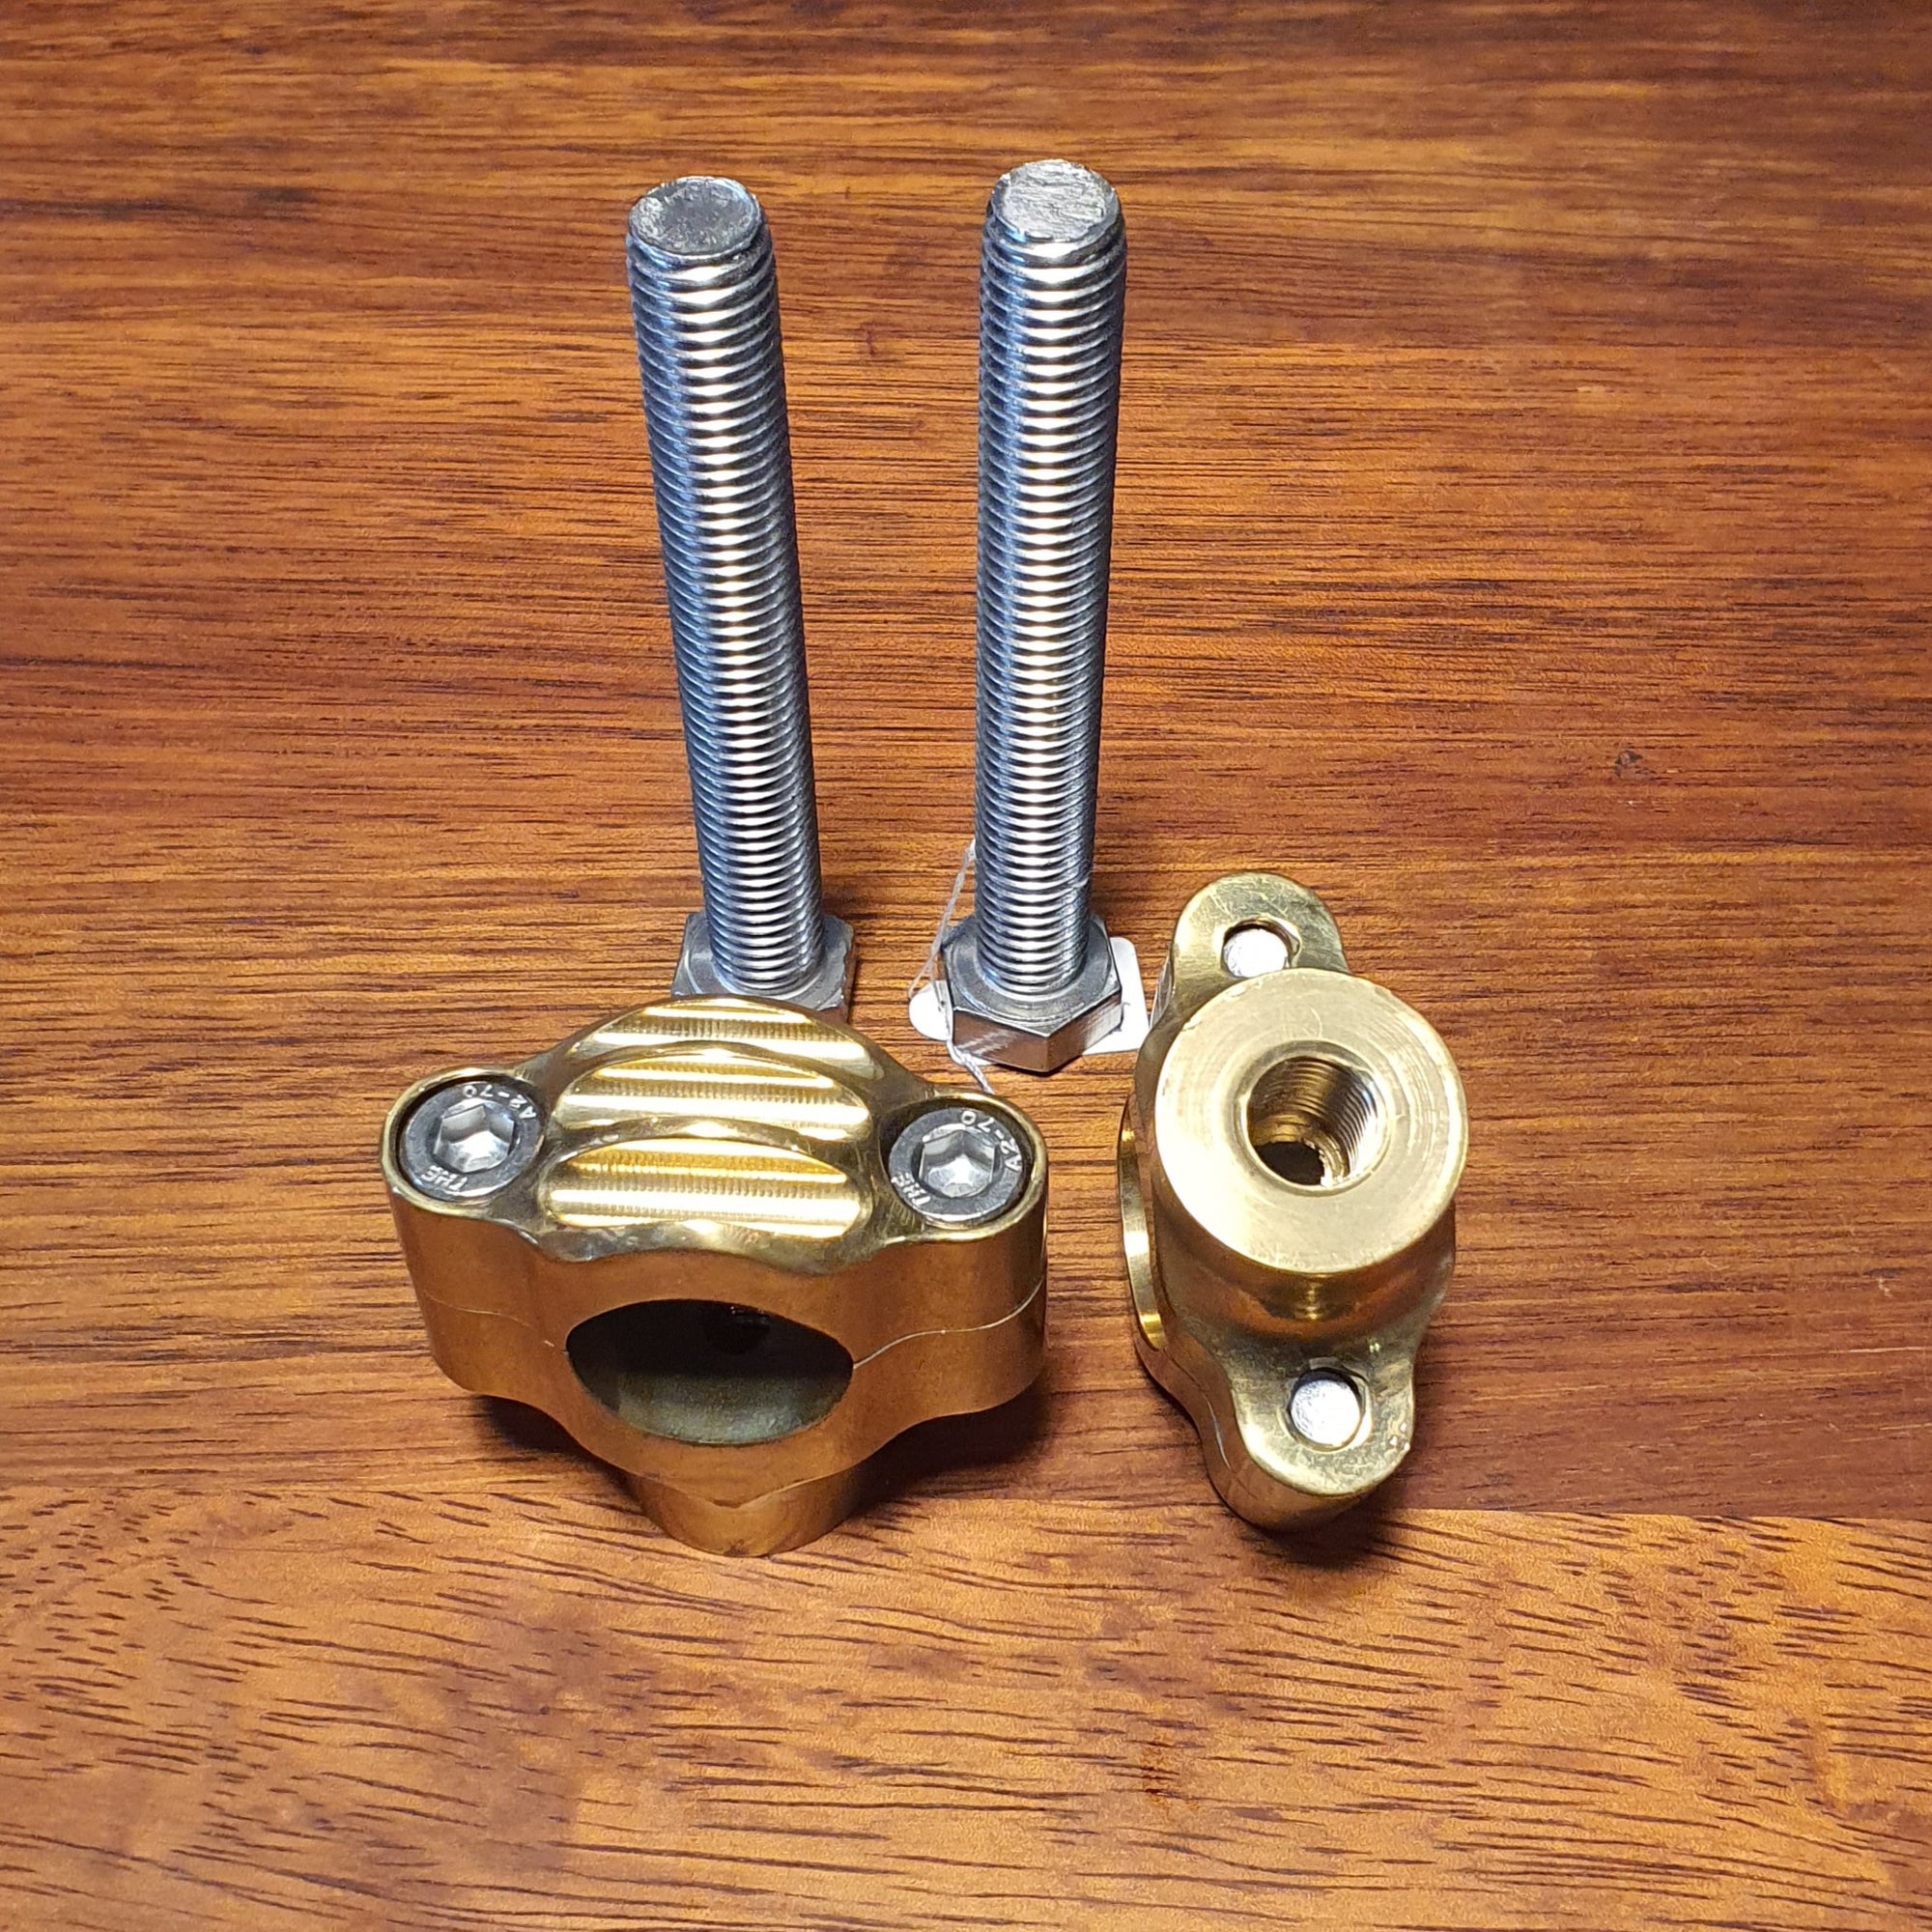 Solid brass risers for 1" bars